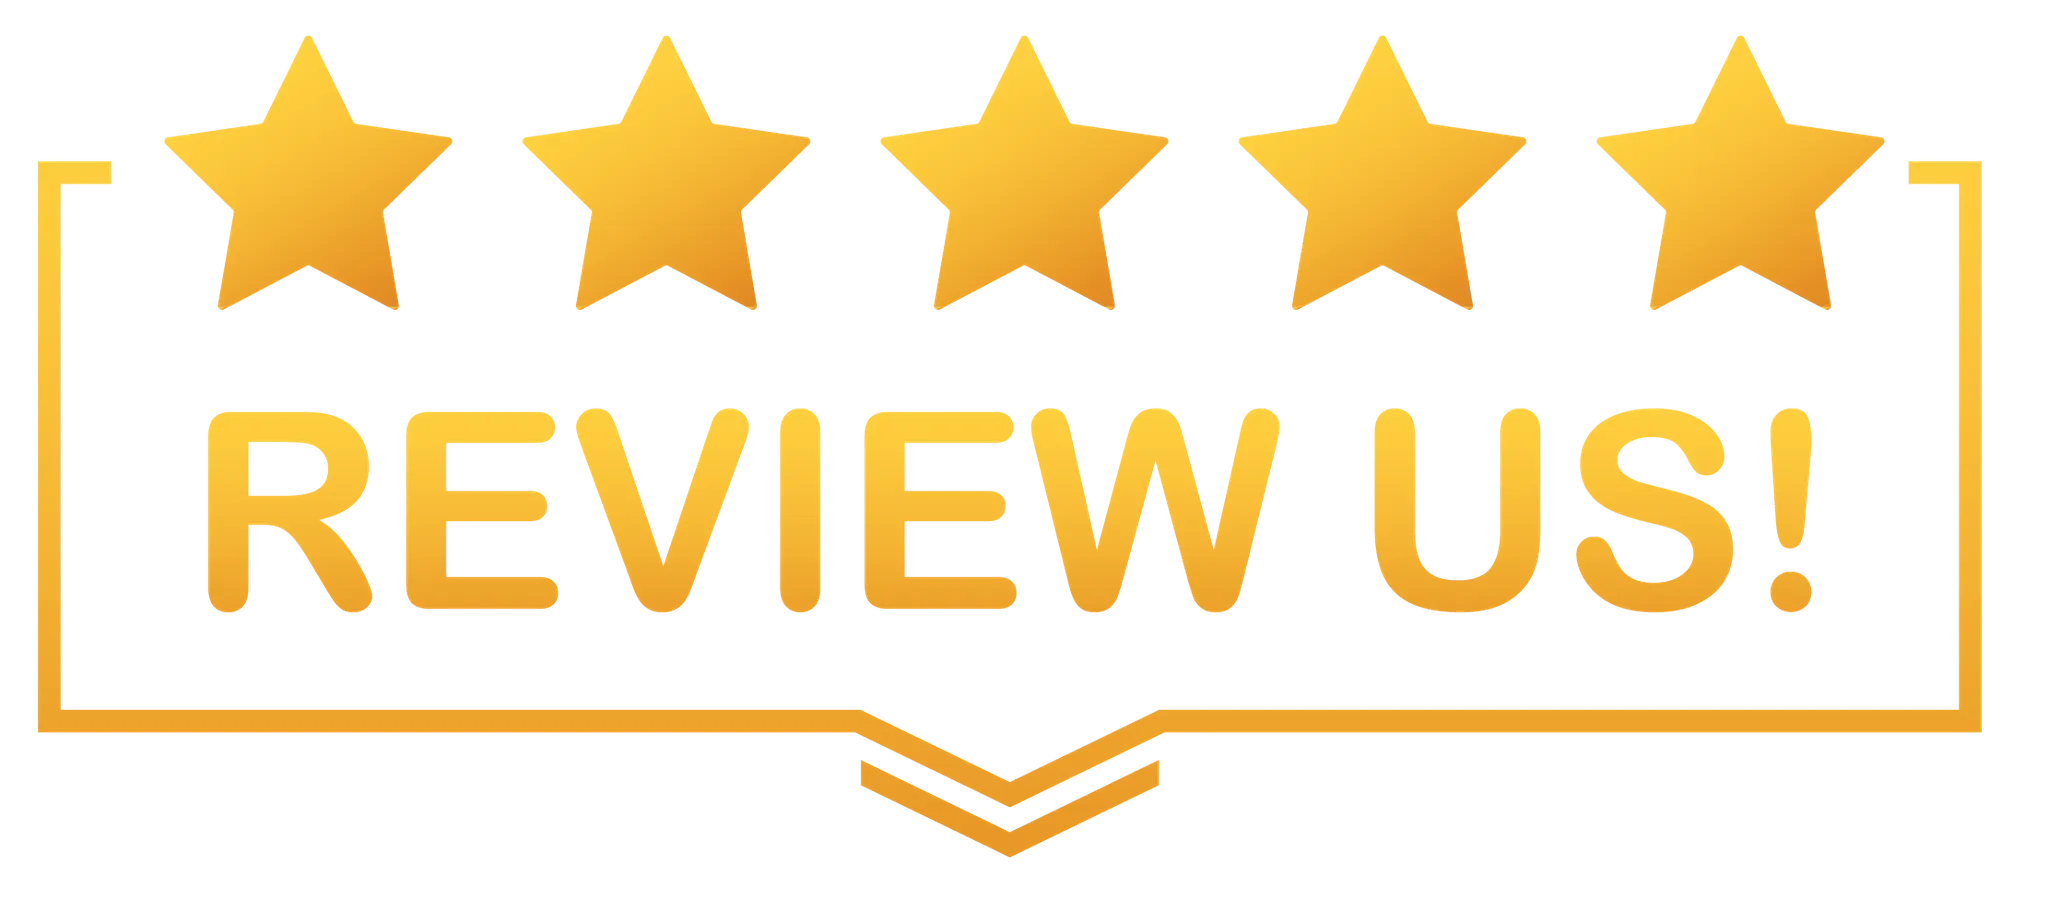 Increase your chances by leaving a review on all 4 links!